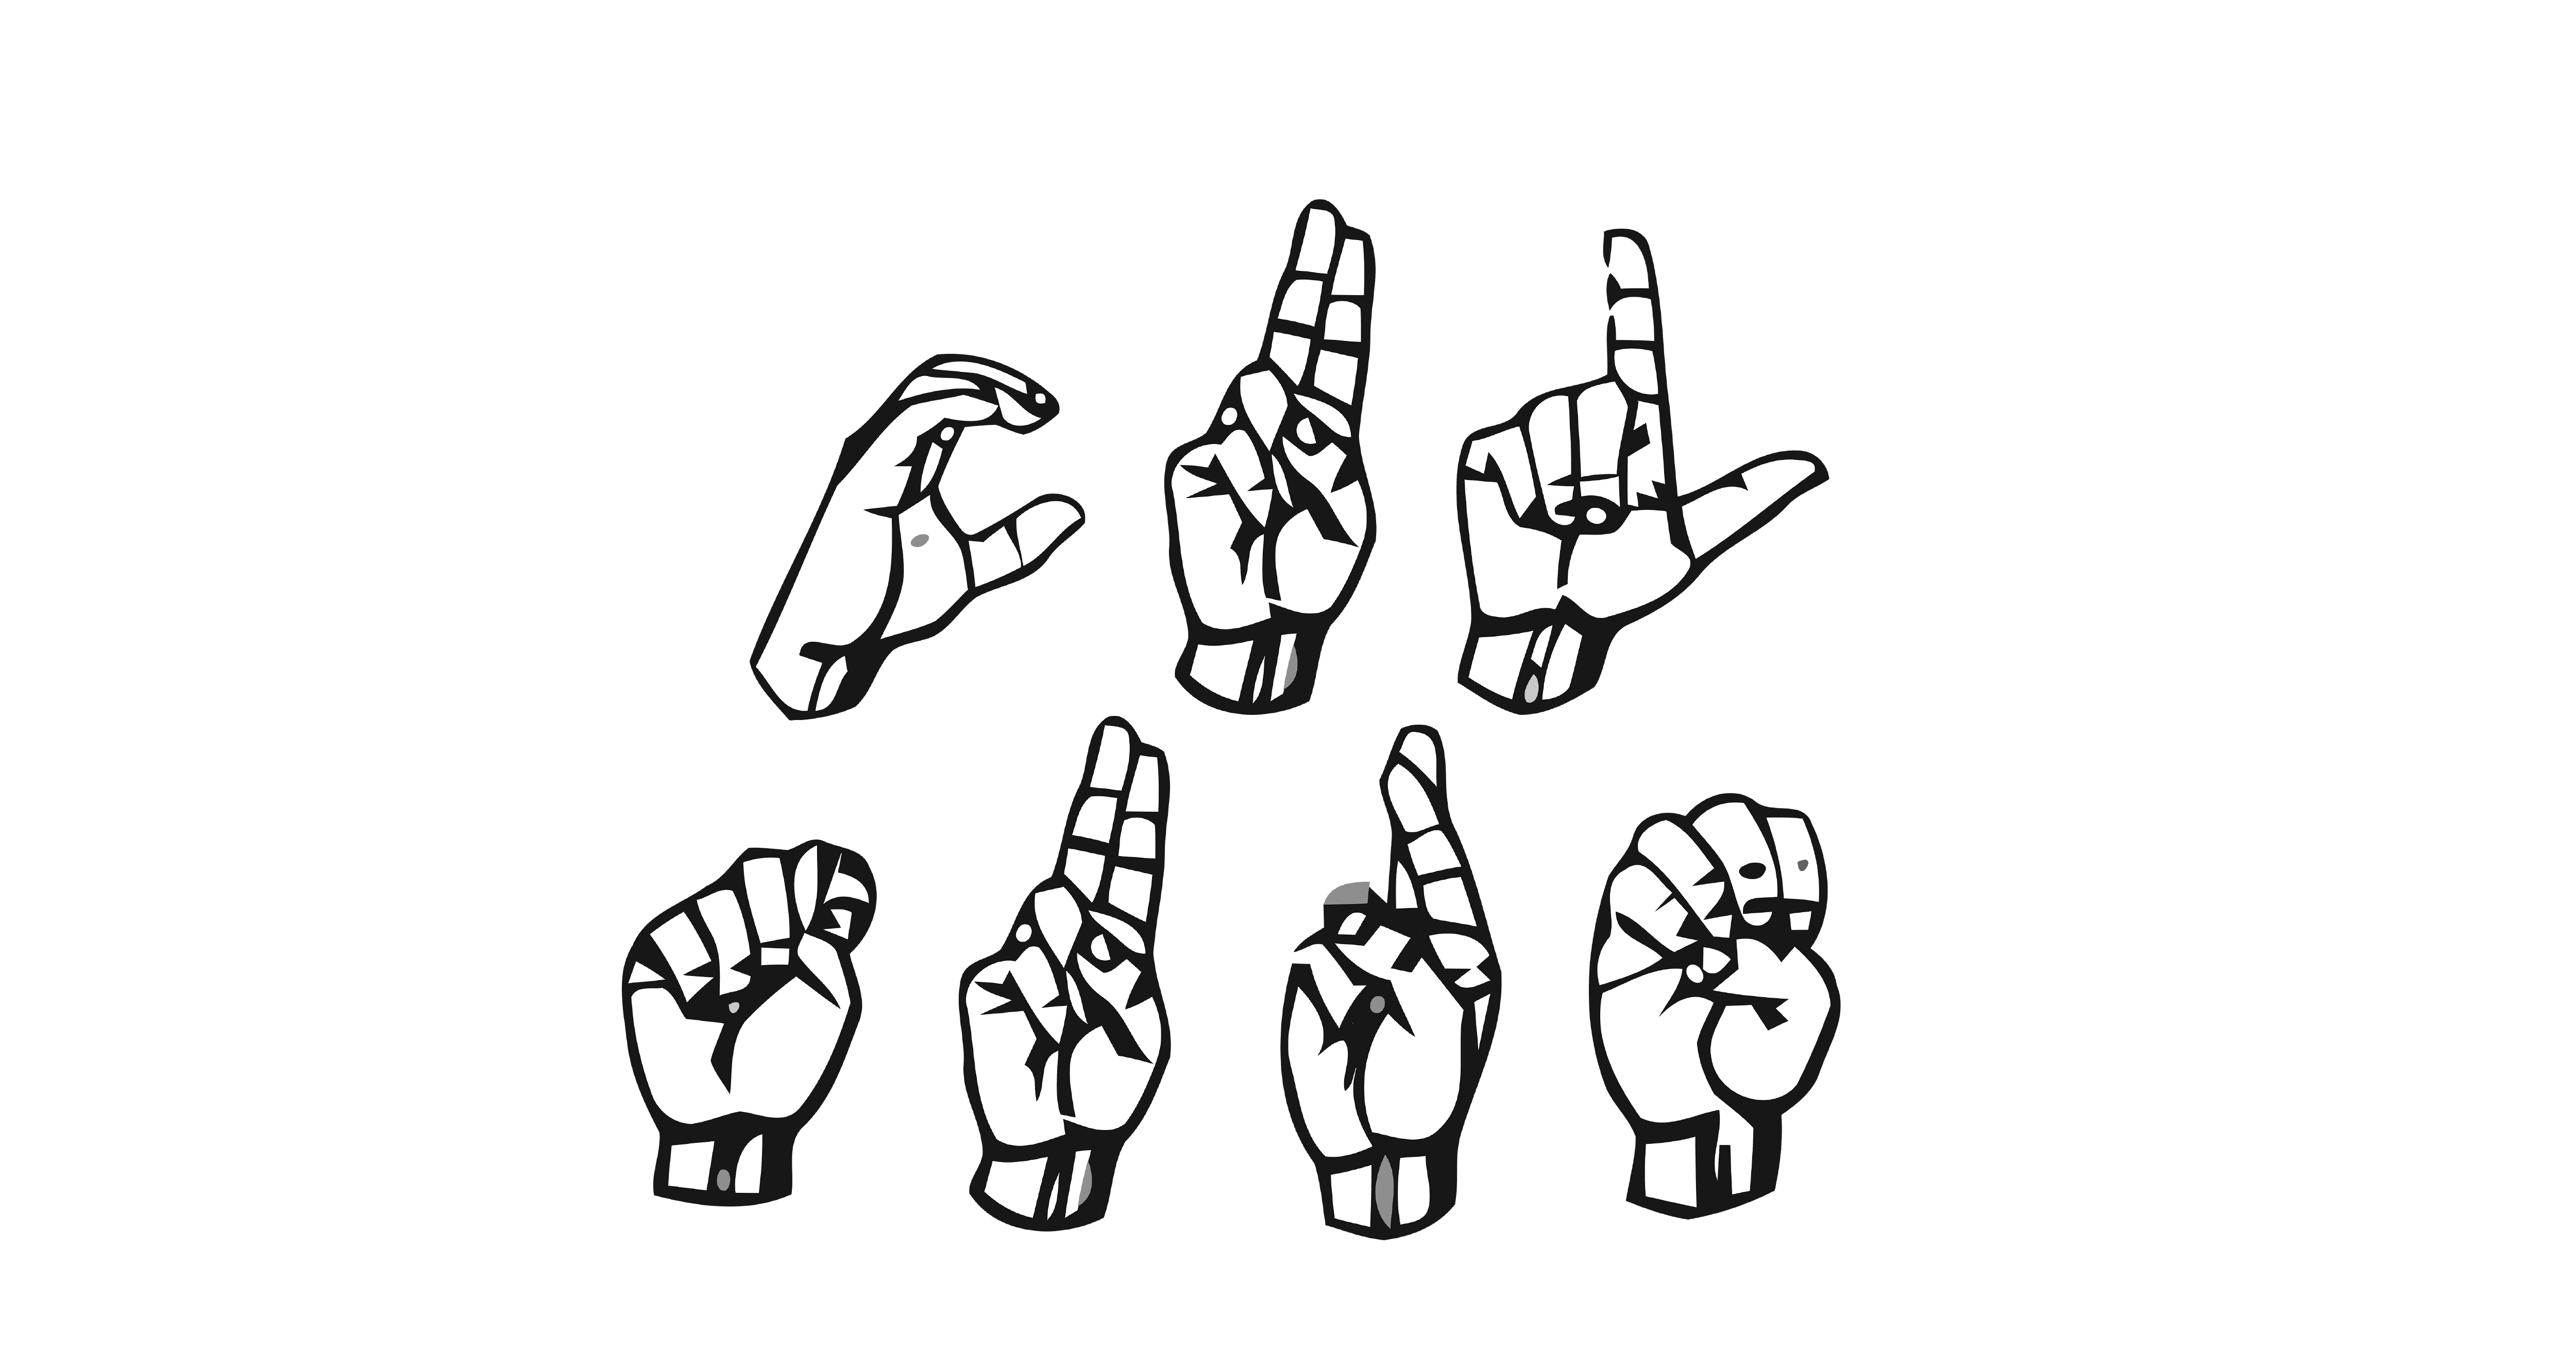 Sign language letters spelling out the word culture